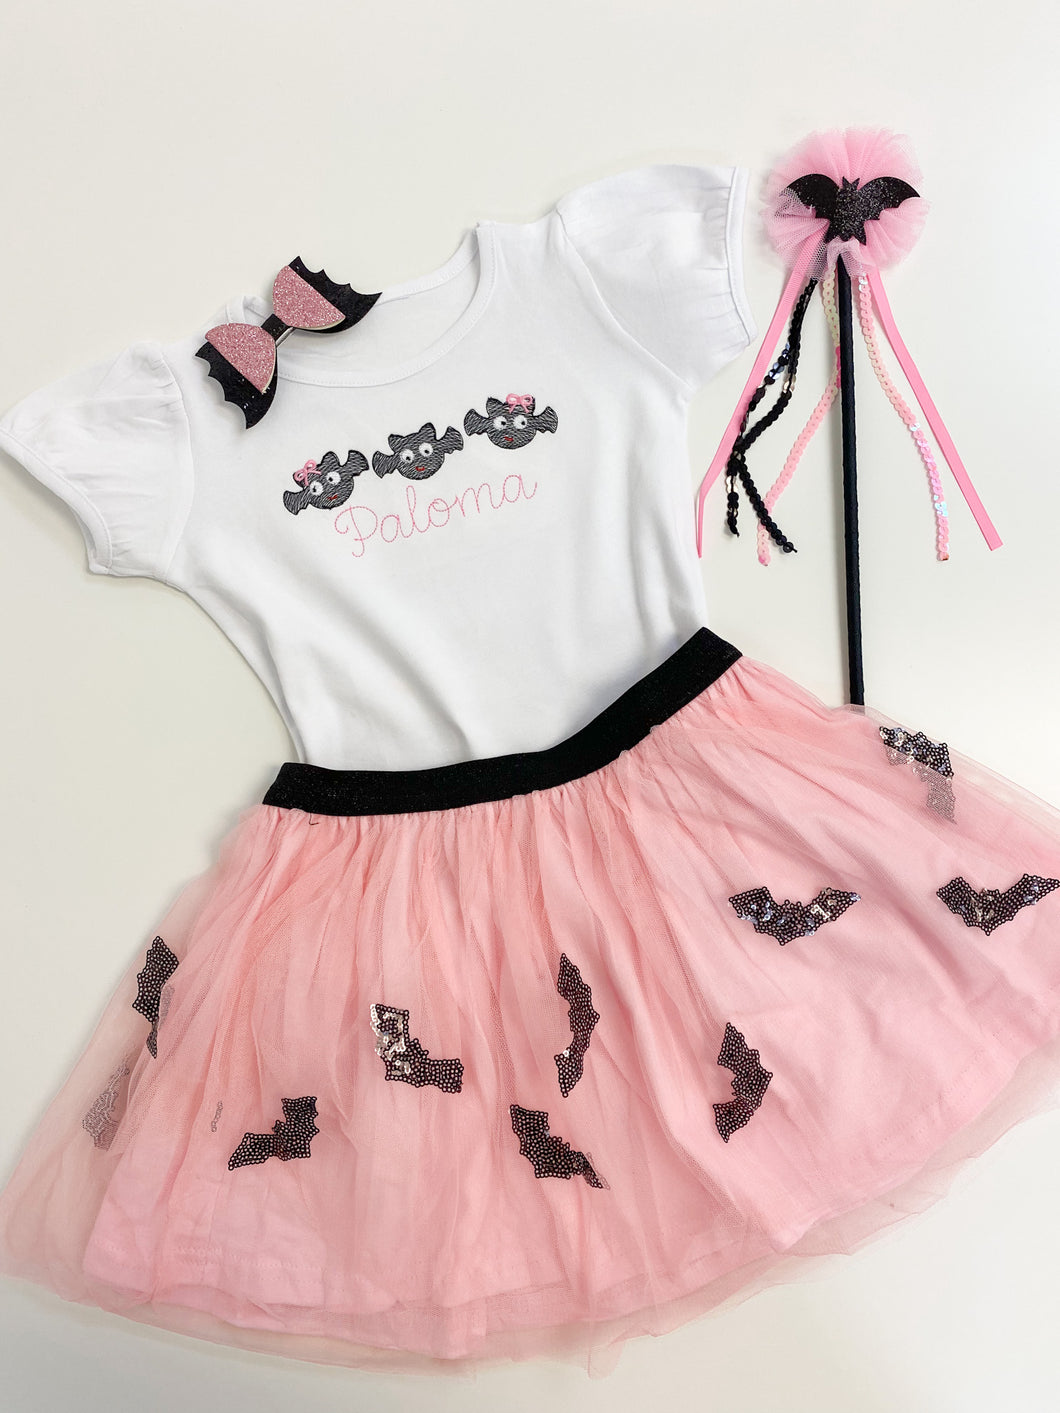 Bats with Bows Tee Or Onesie